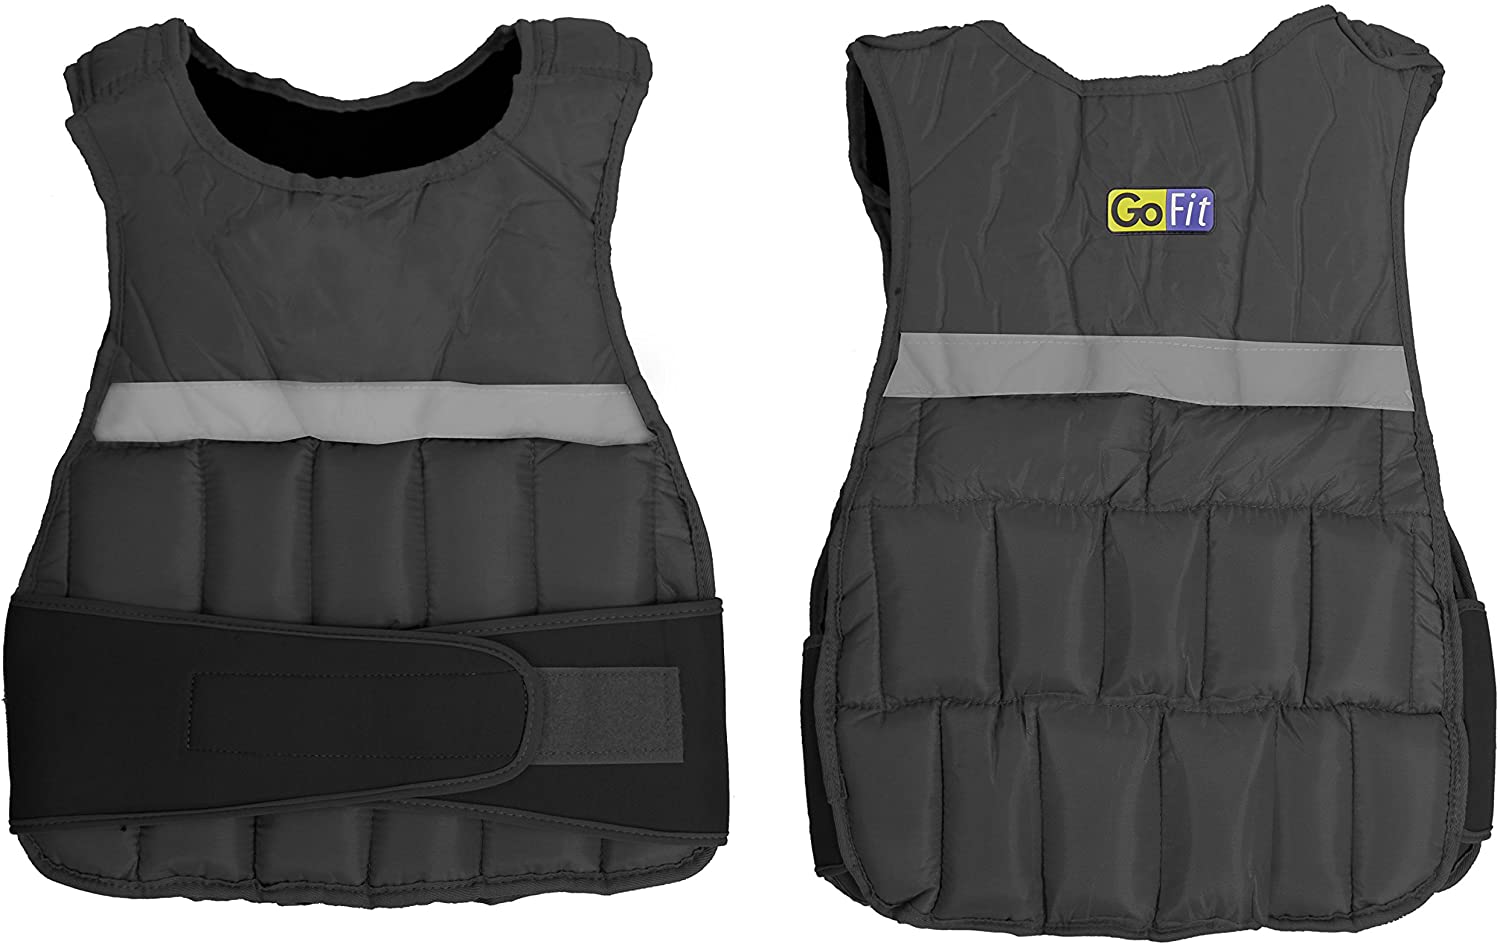 GoFit Padded Adjustable Weighted Vests